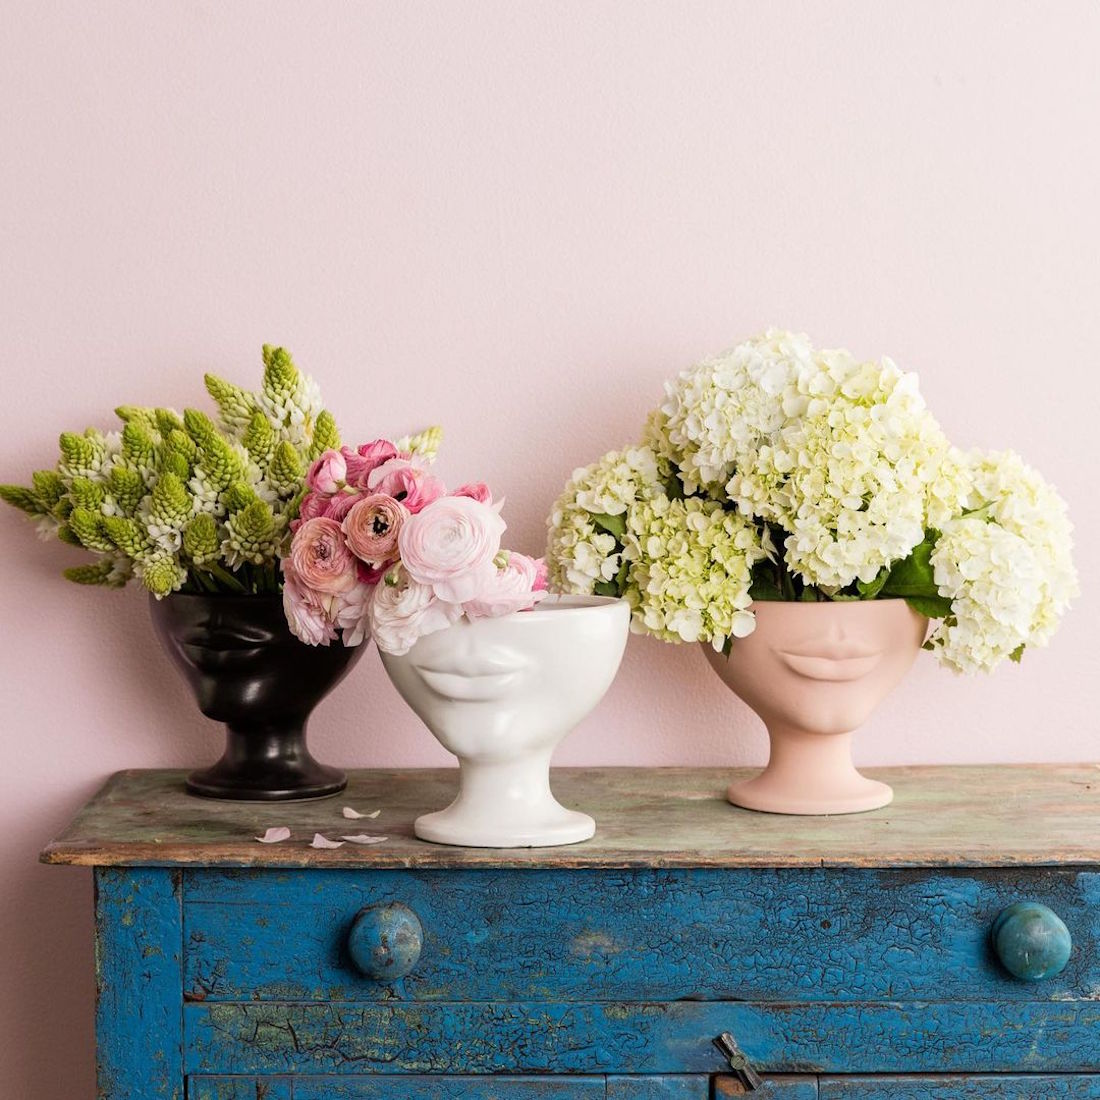 Three vases sit on a rustic hallway table with blooms overflowing.